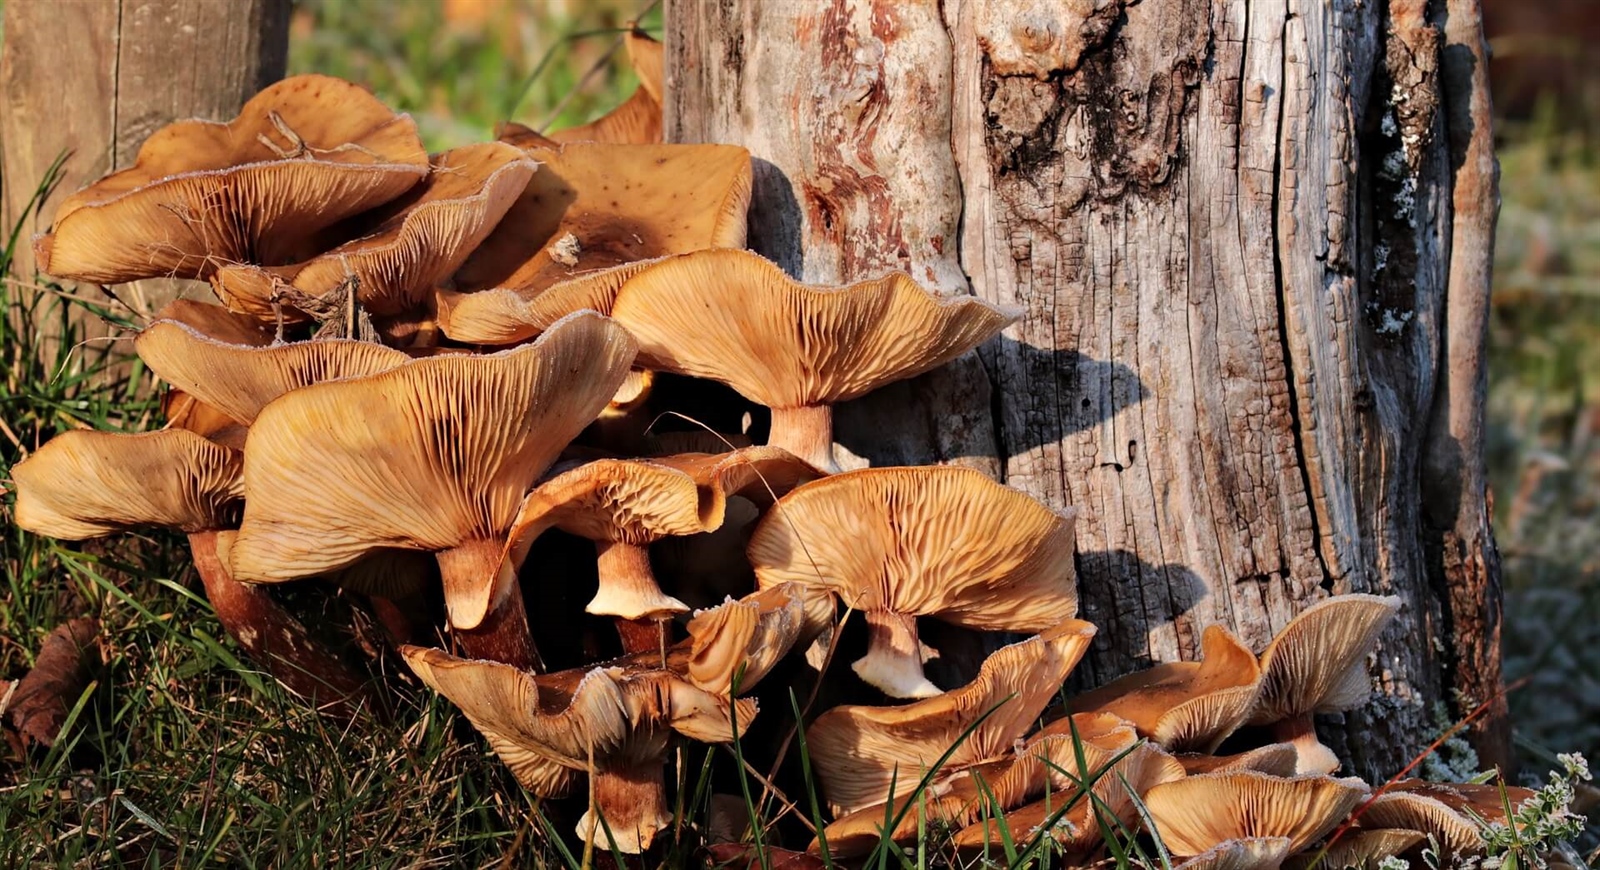 Discovering Mushrooms in the Pollino National Park